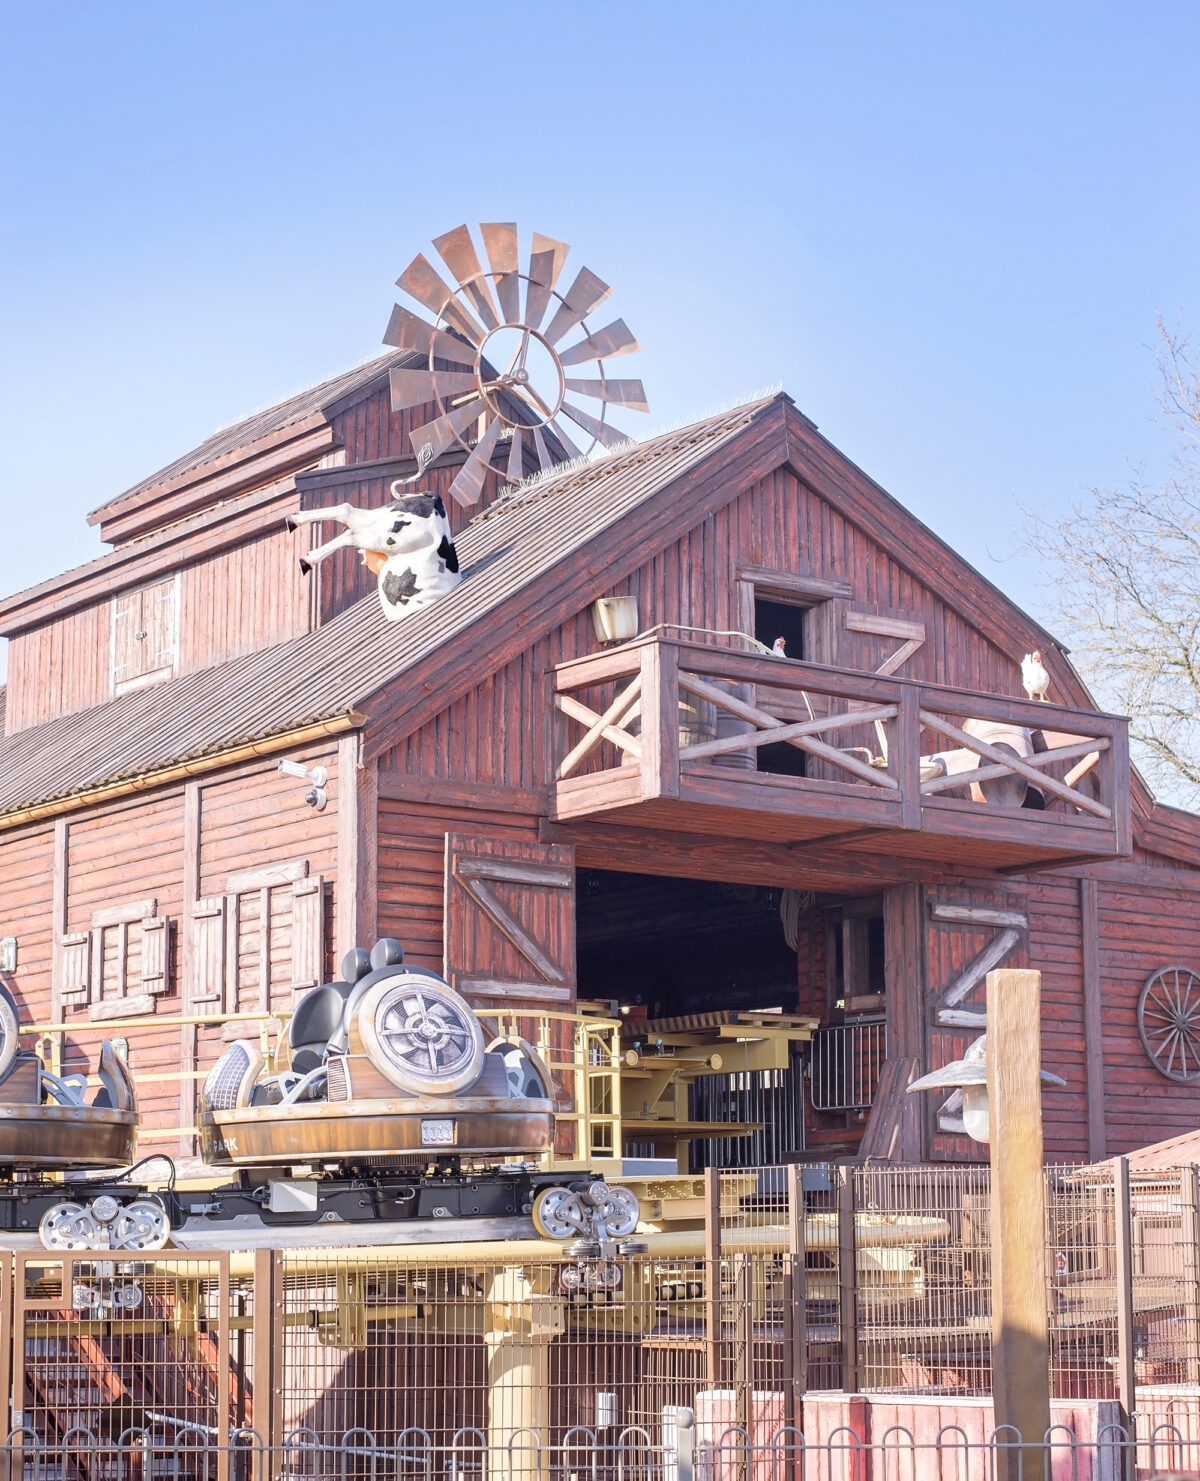 Image shows the bar building for the Storm Chaser rollercoaster at Tornado Springs in Paultons Park. There is a cow's bottom sticking out of the roof.